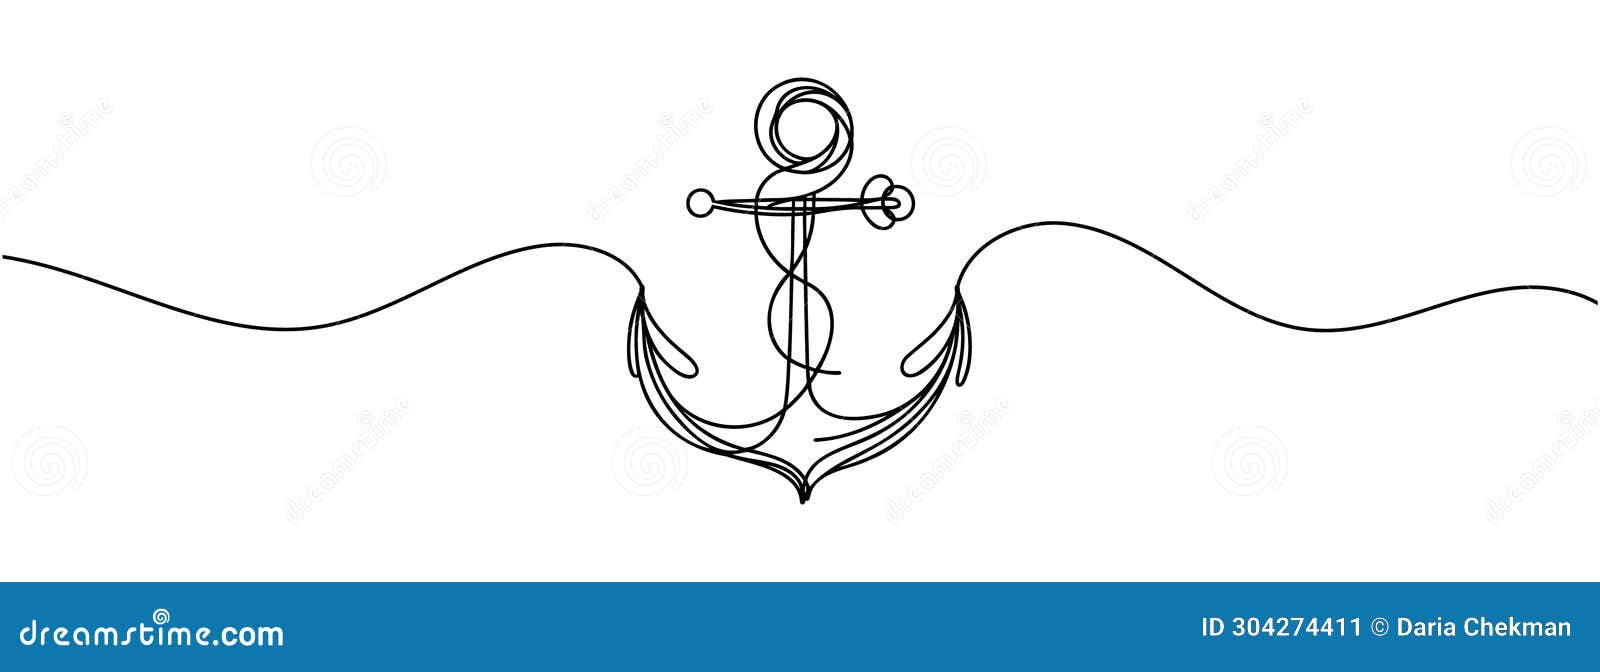 Continuous One Line Drawing of a Sea Anchor. Vector Illustration